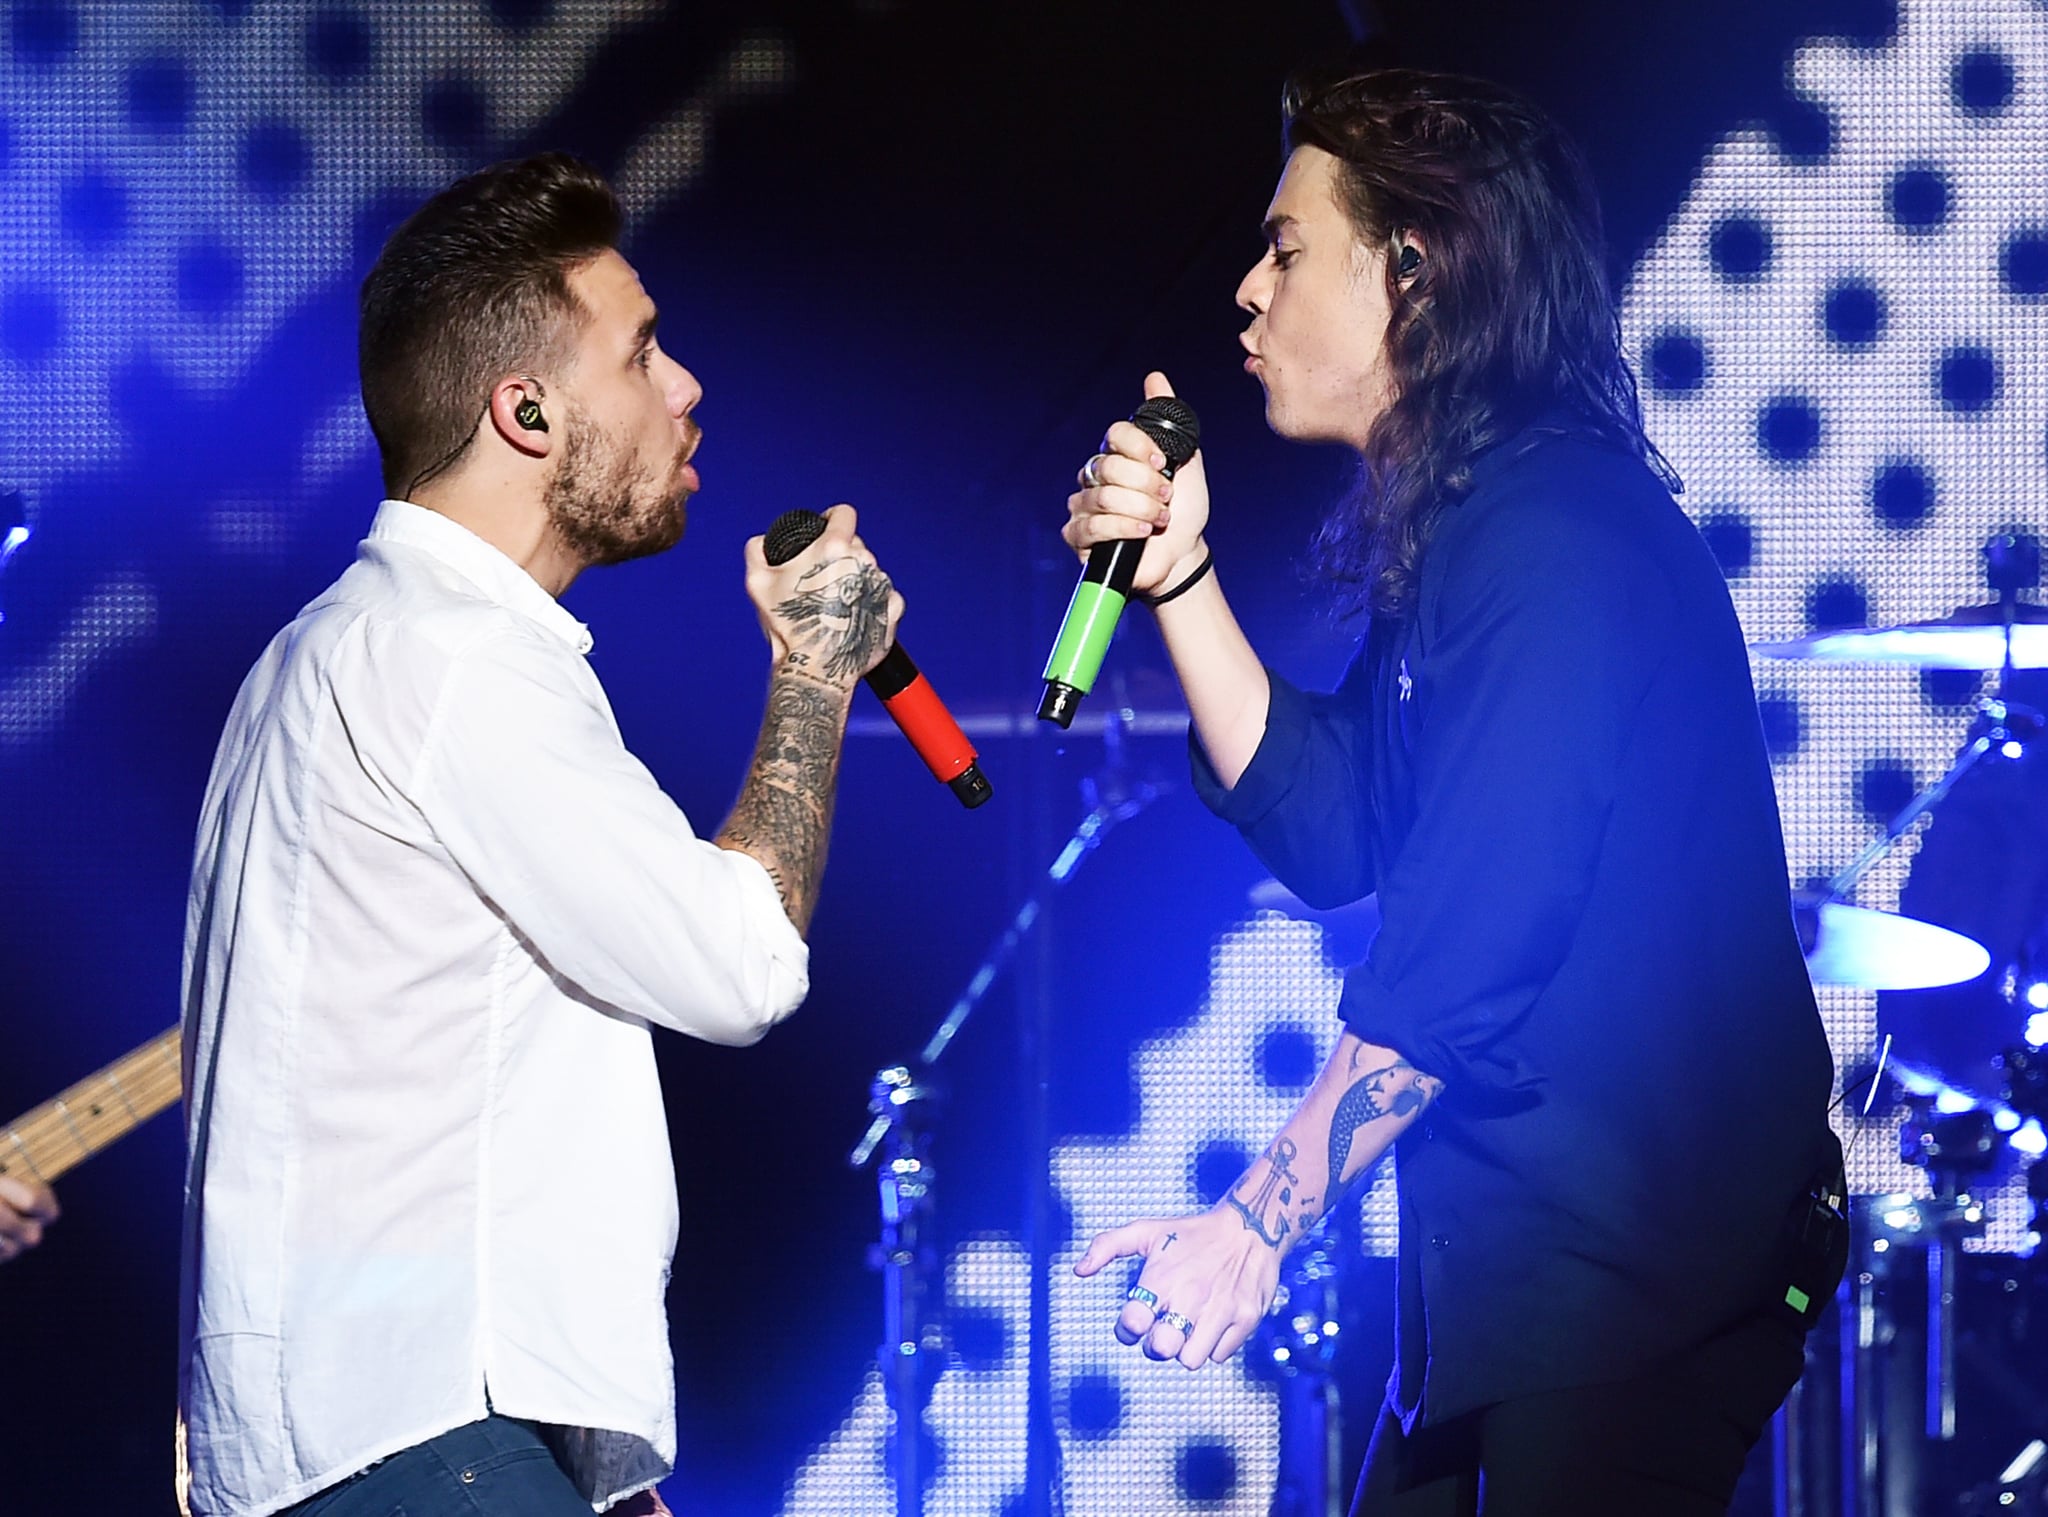 LOS ANGELES, CA - DECEMBER 04:  Recording artists Liam Payne (L) and Harry Styles of One Direction perform onstage during 102.7 KIIS FMs Jingle Ball 2015 Presented by Capital One at STAPLES CENTER on December 4, 2015 in Los Angeles, California.  (Photo by Kevin Winter/Getty Images for iHeartMedia)